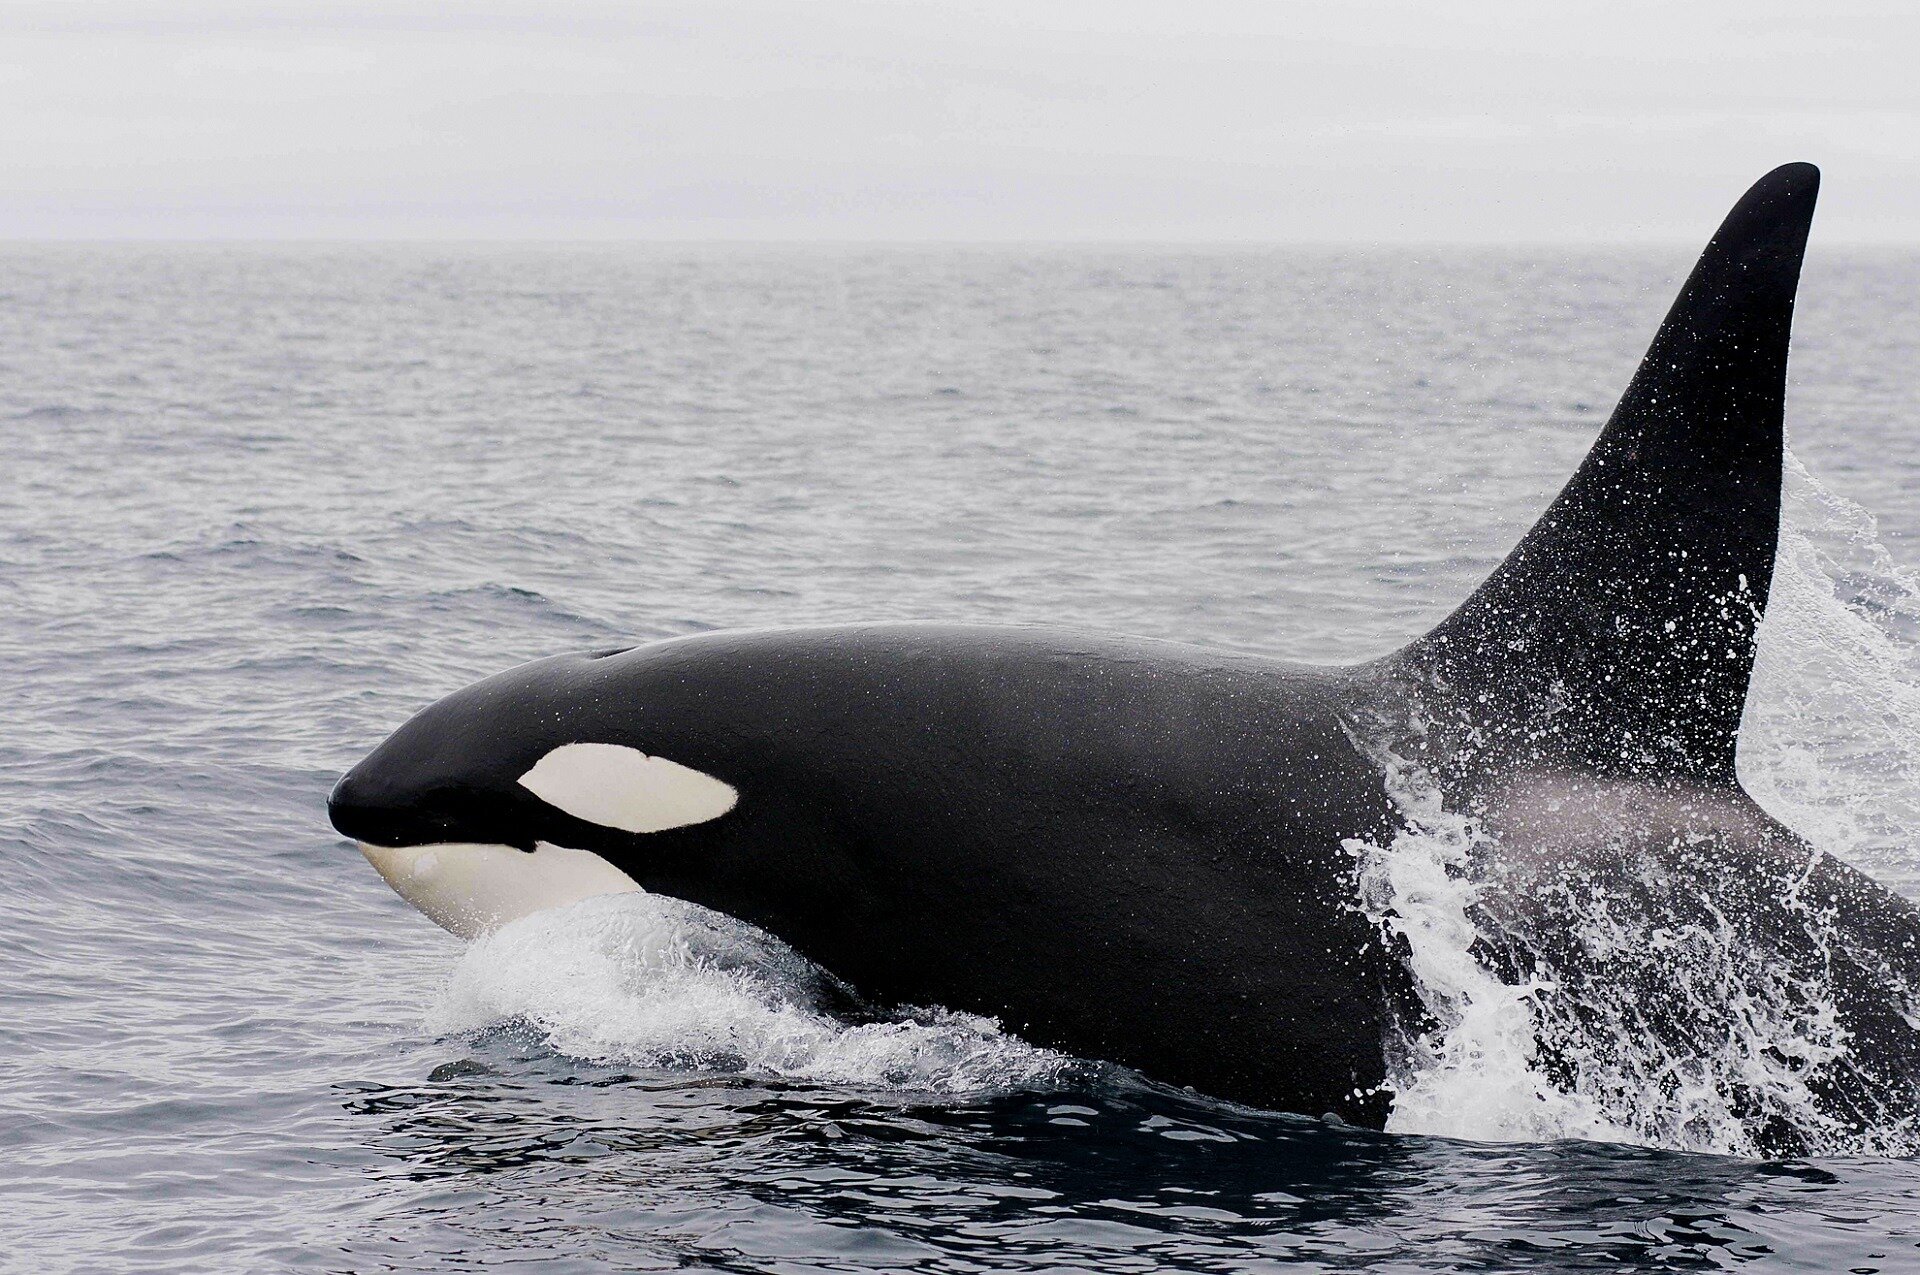 Another new orca baby born to j pod